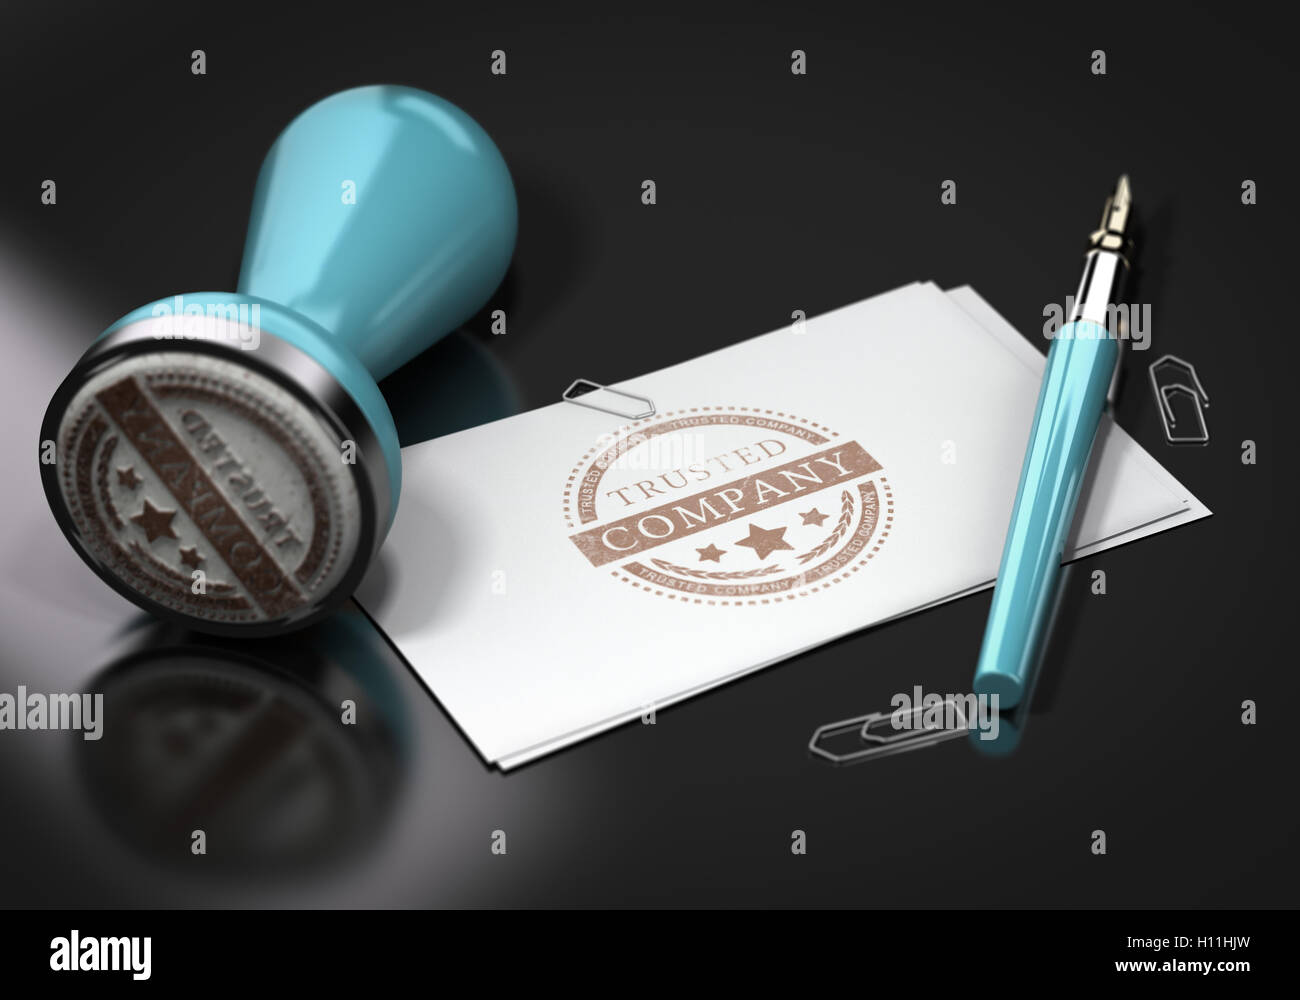 3D illustration of business cards with tursted company imprinted on it. Image over black background with rubber stamp fountain p Stock Photo